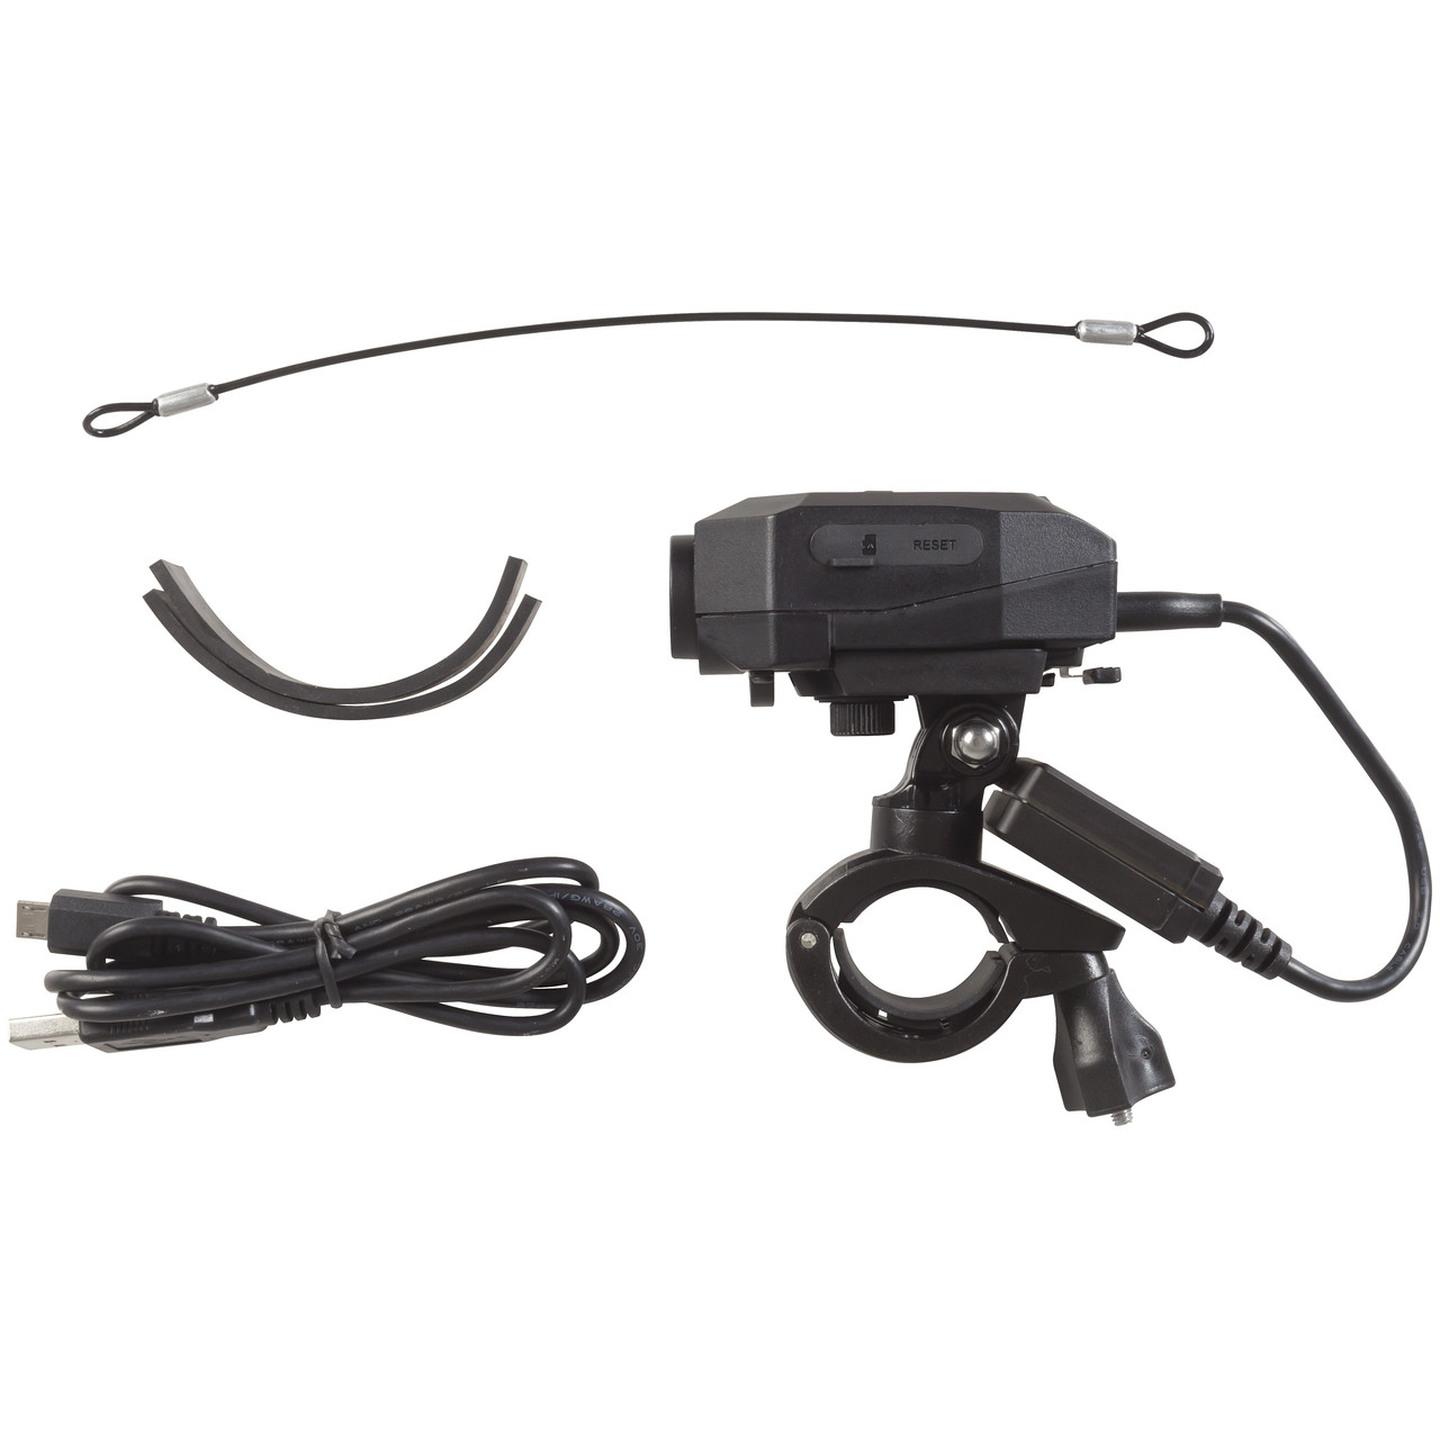 1296p Event Camera with GPS for Bikes